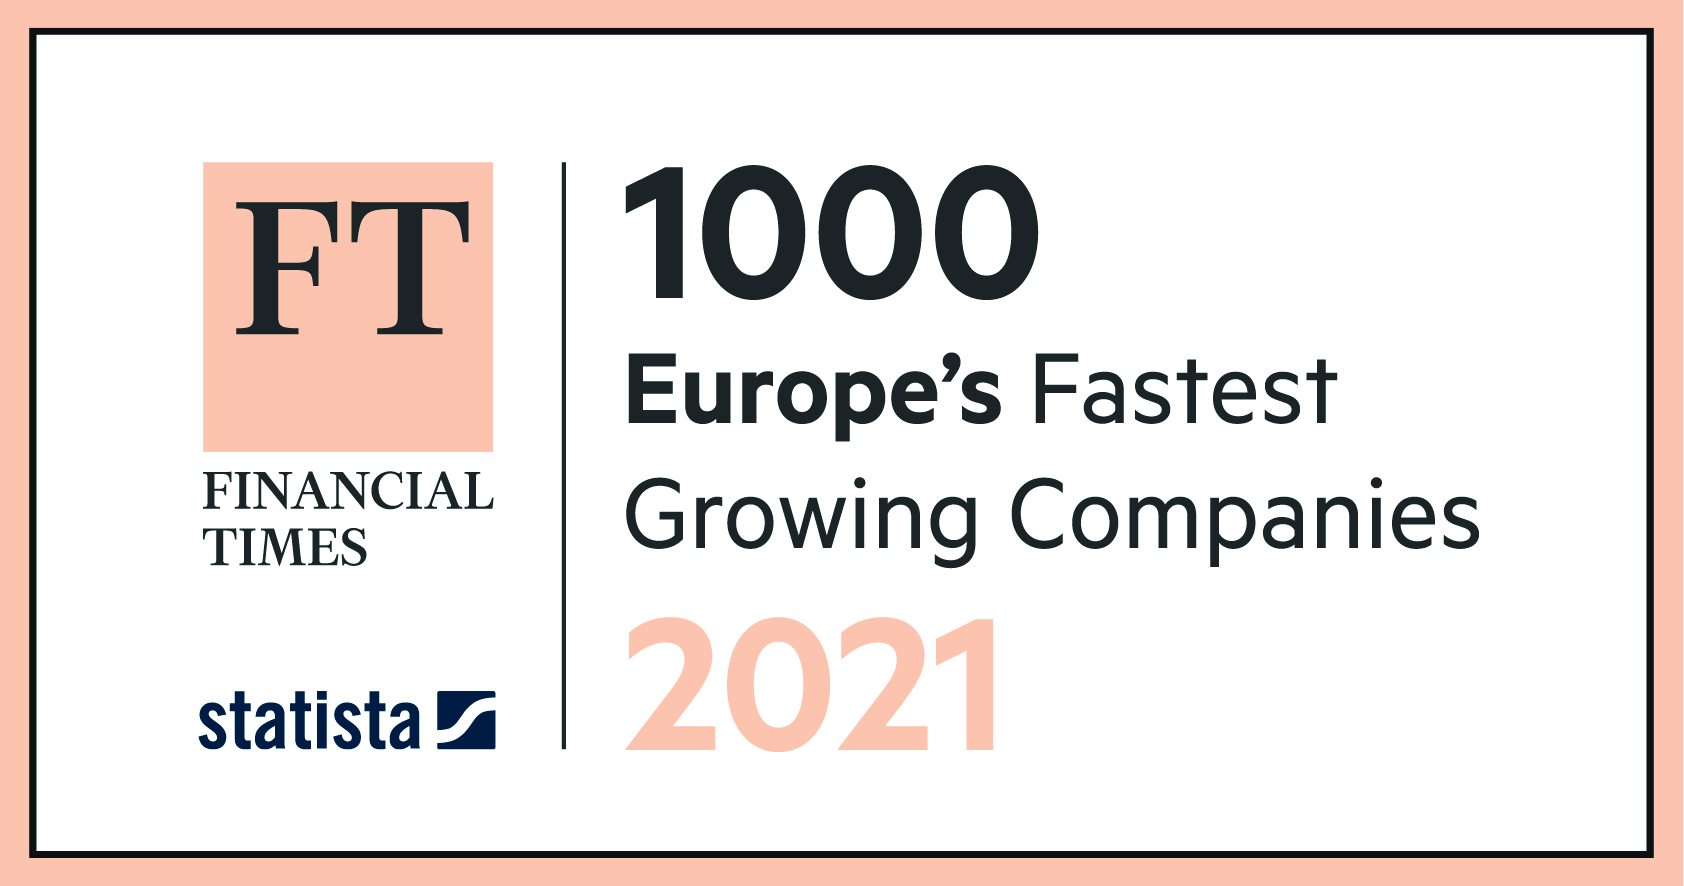 1000 Europe's Fastest Growing Companies 2021